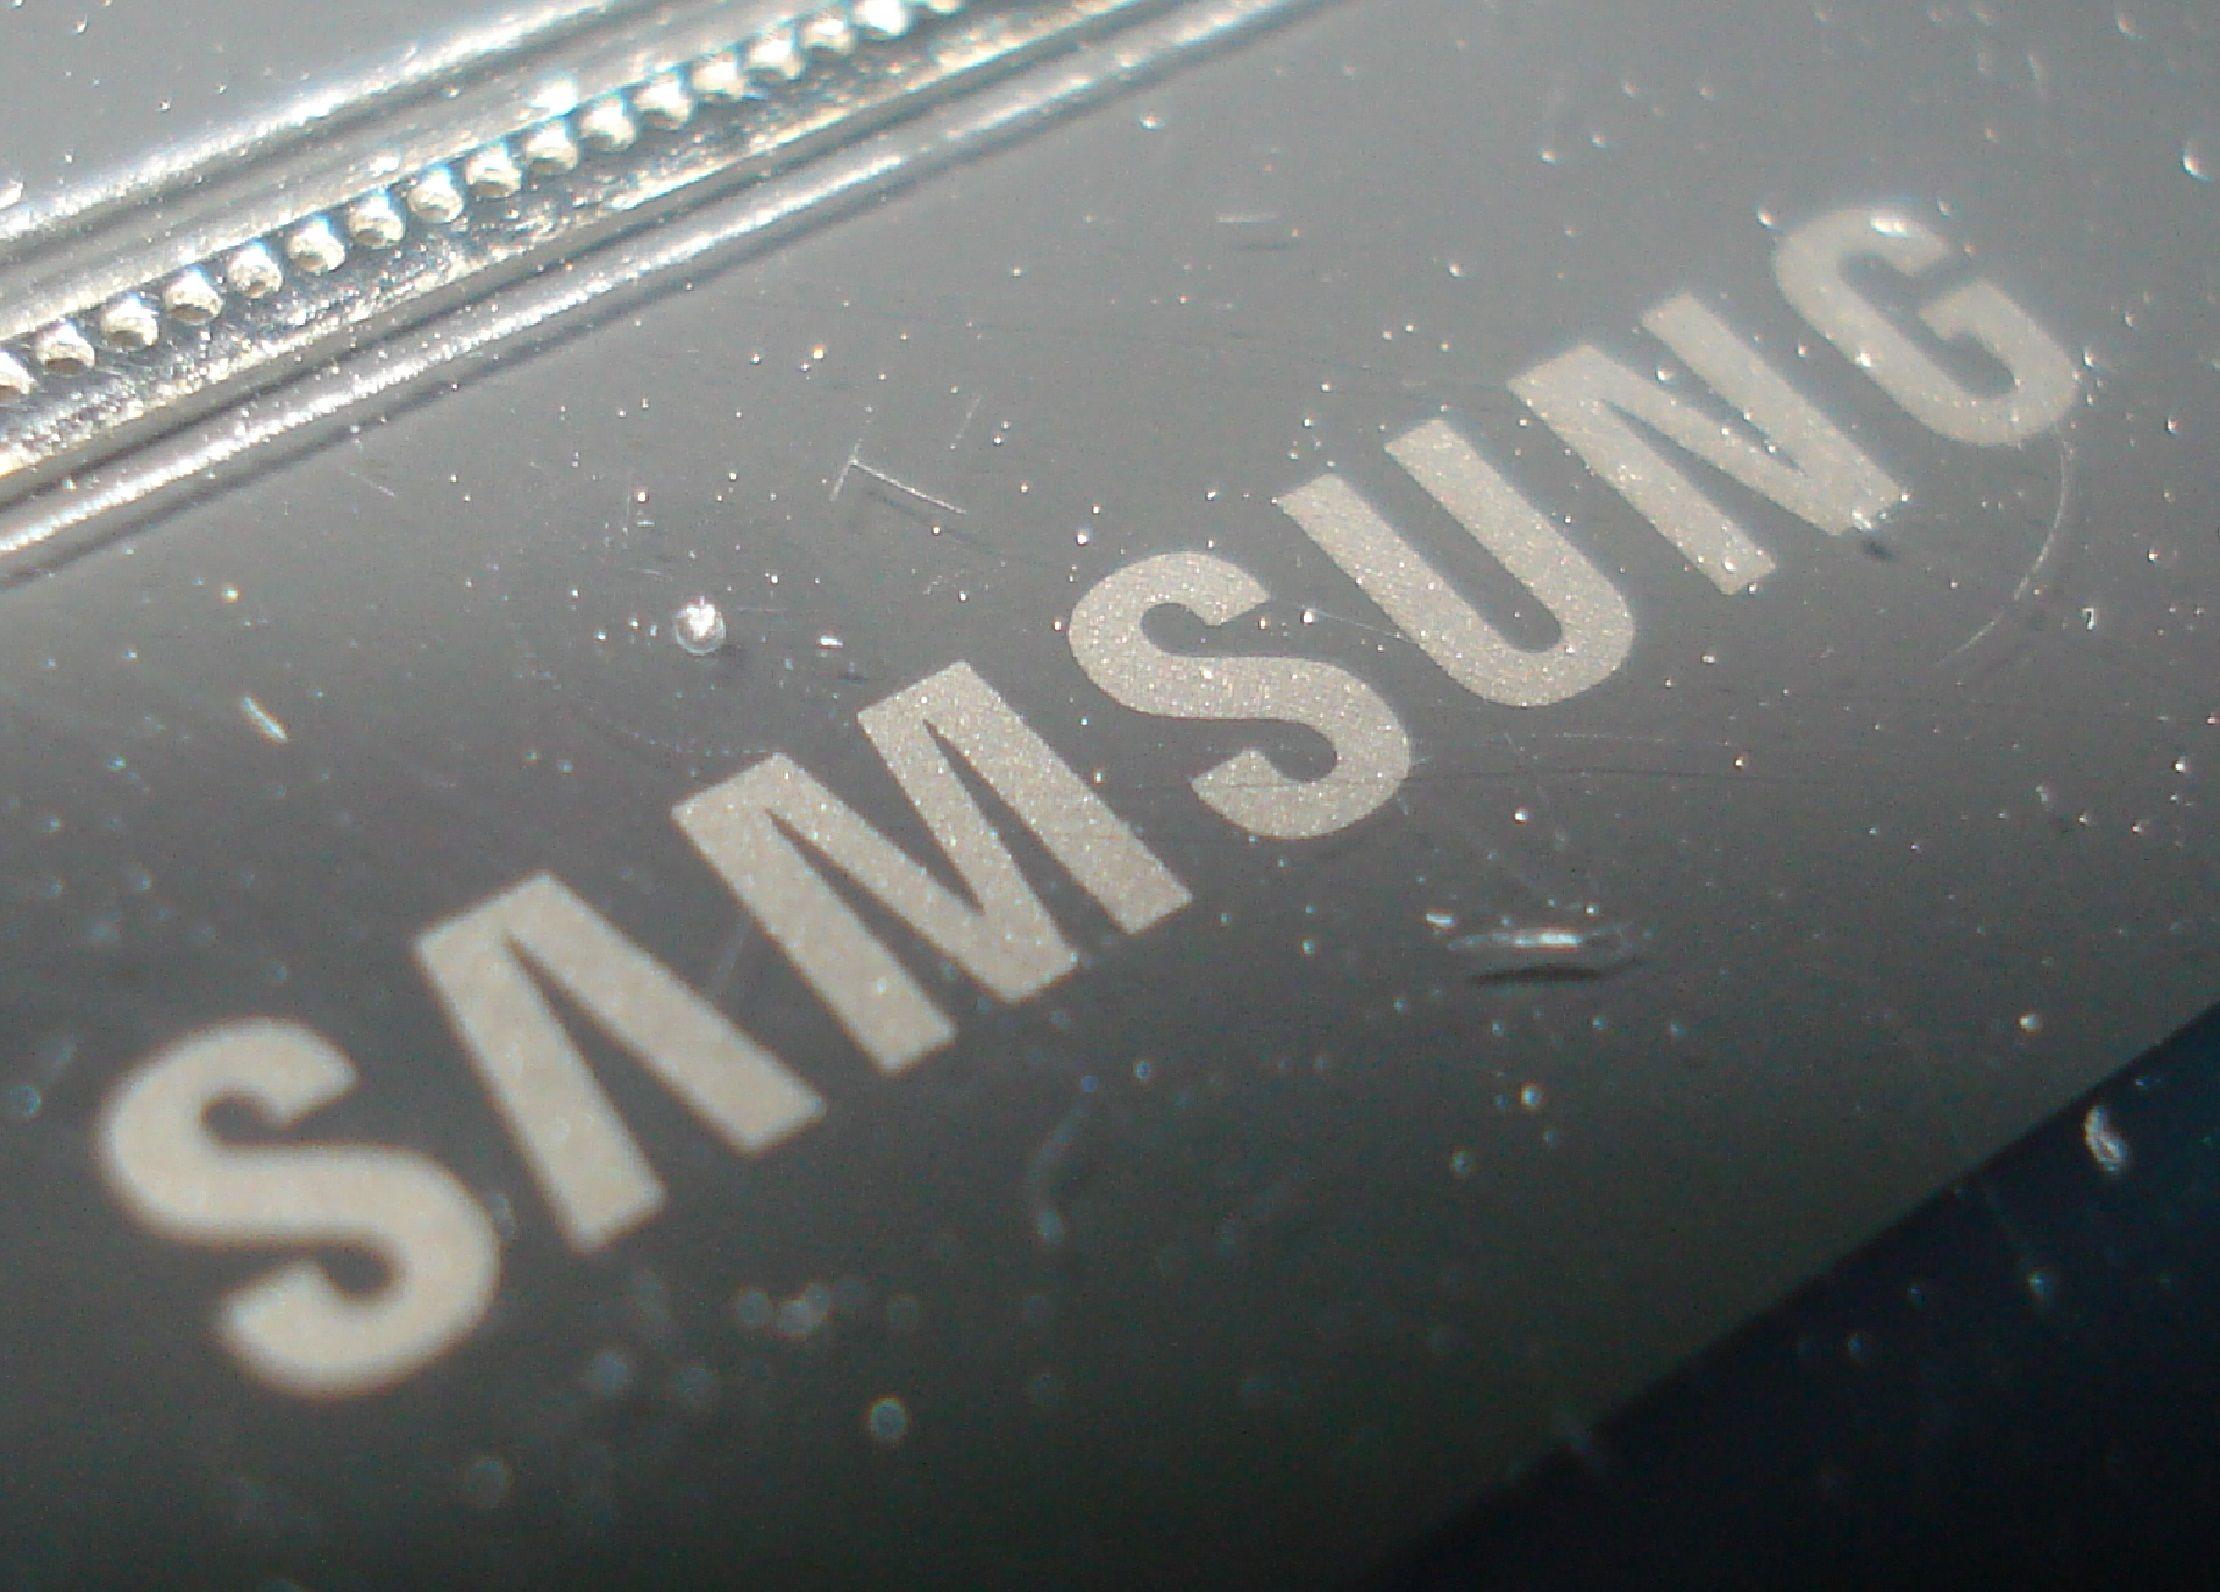 2013 Samsung Logo - Samsung Galaxy S2 Plus Coming In Early 2013?